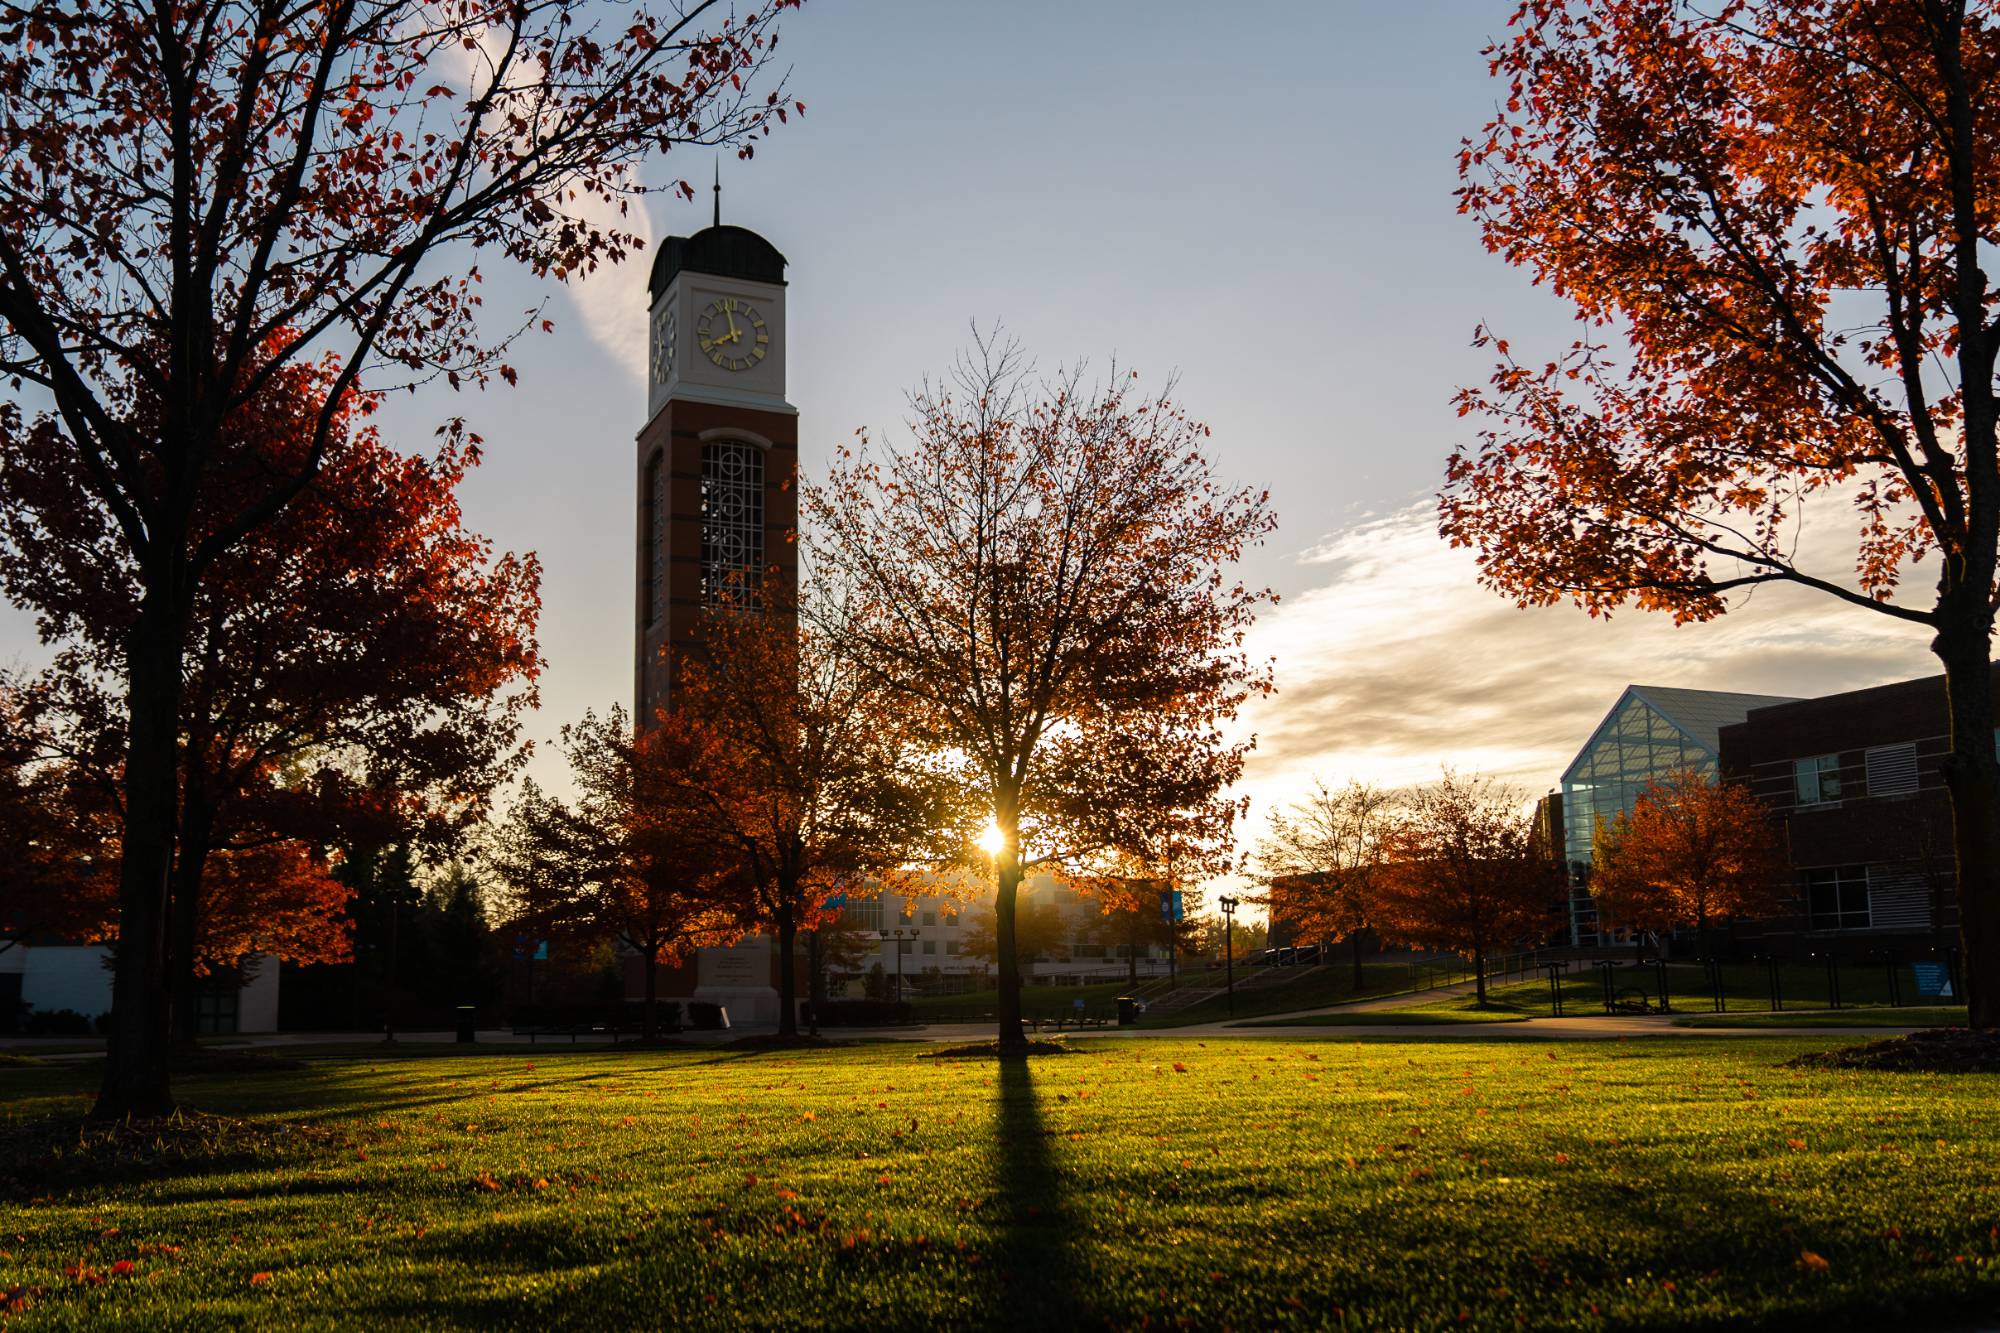 Image of the Clocktower on the Allendale Campus at Sunset